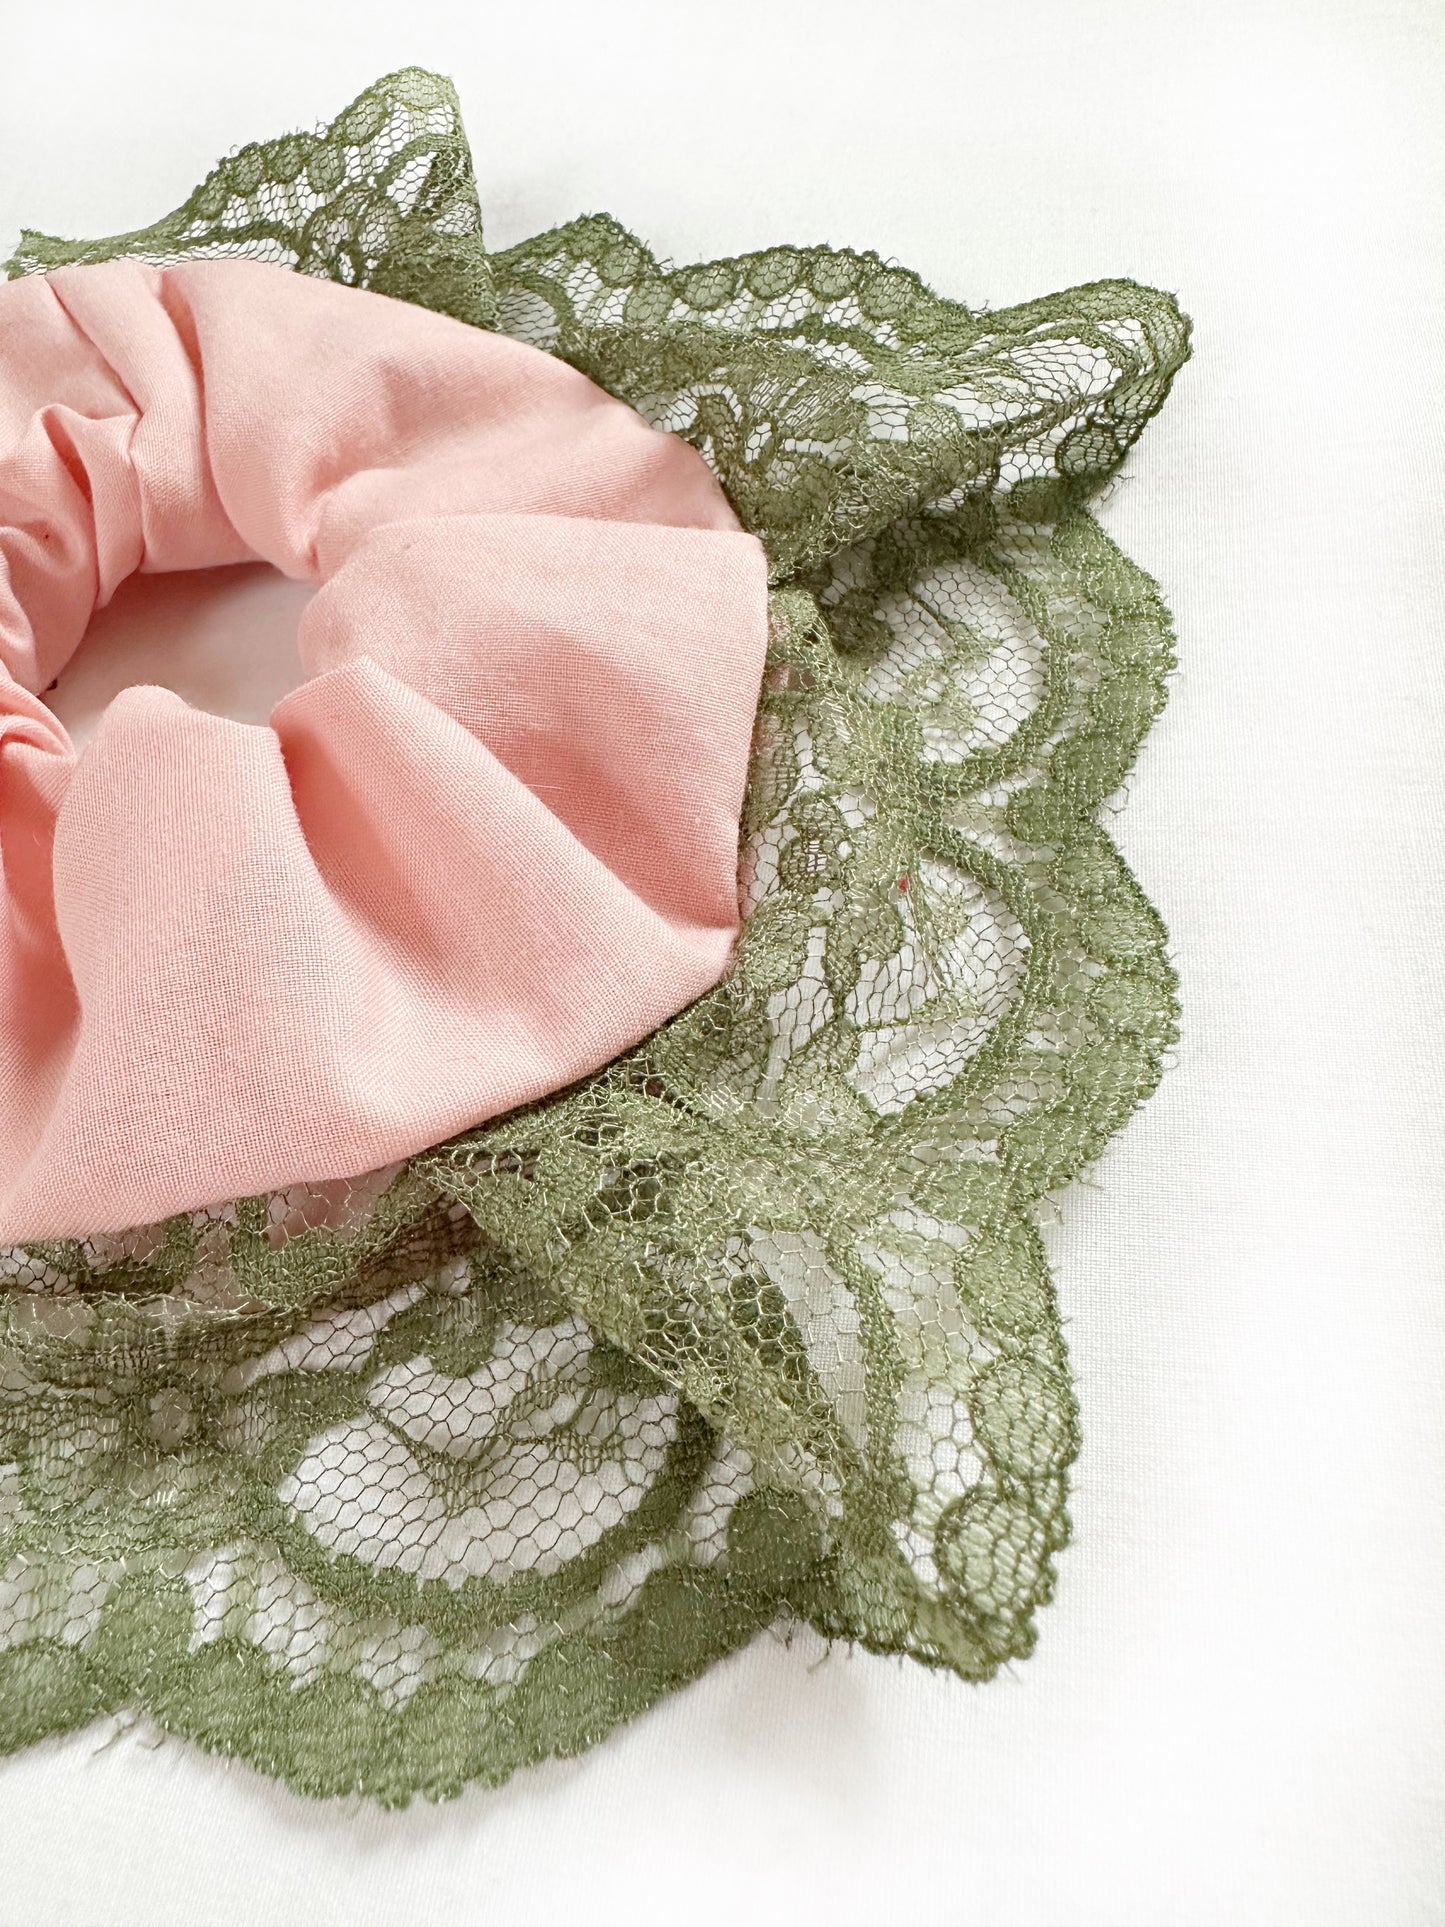 Mini scrunchie in pink and green lace